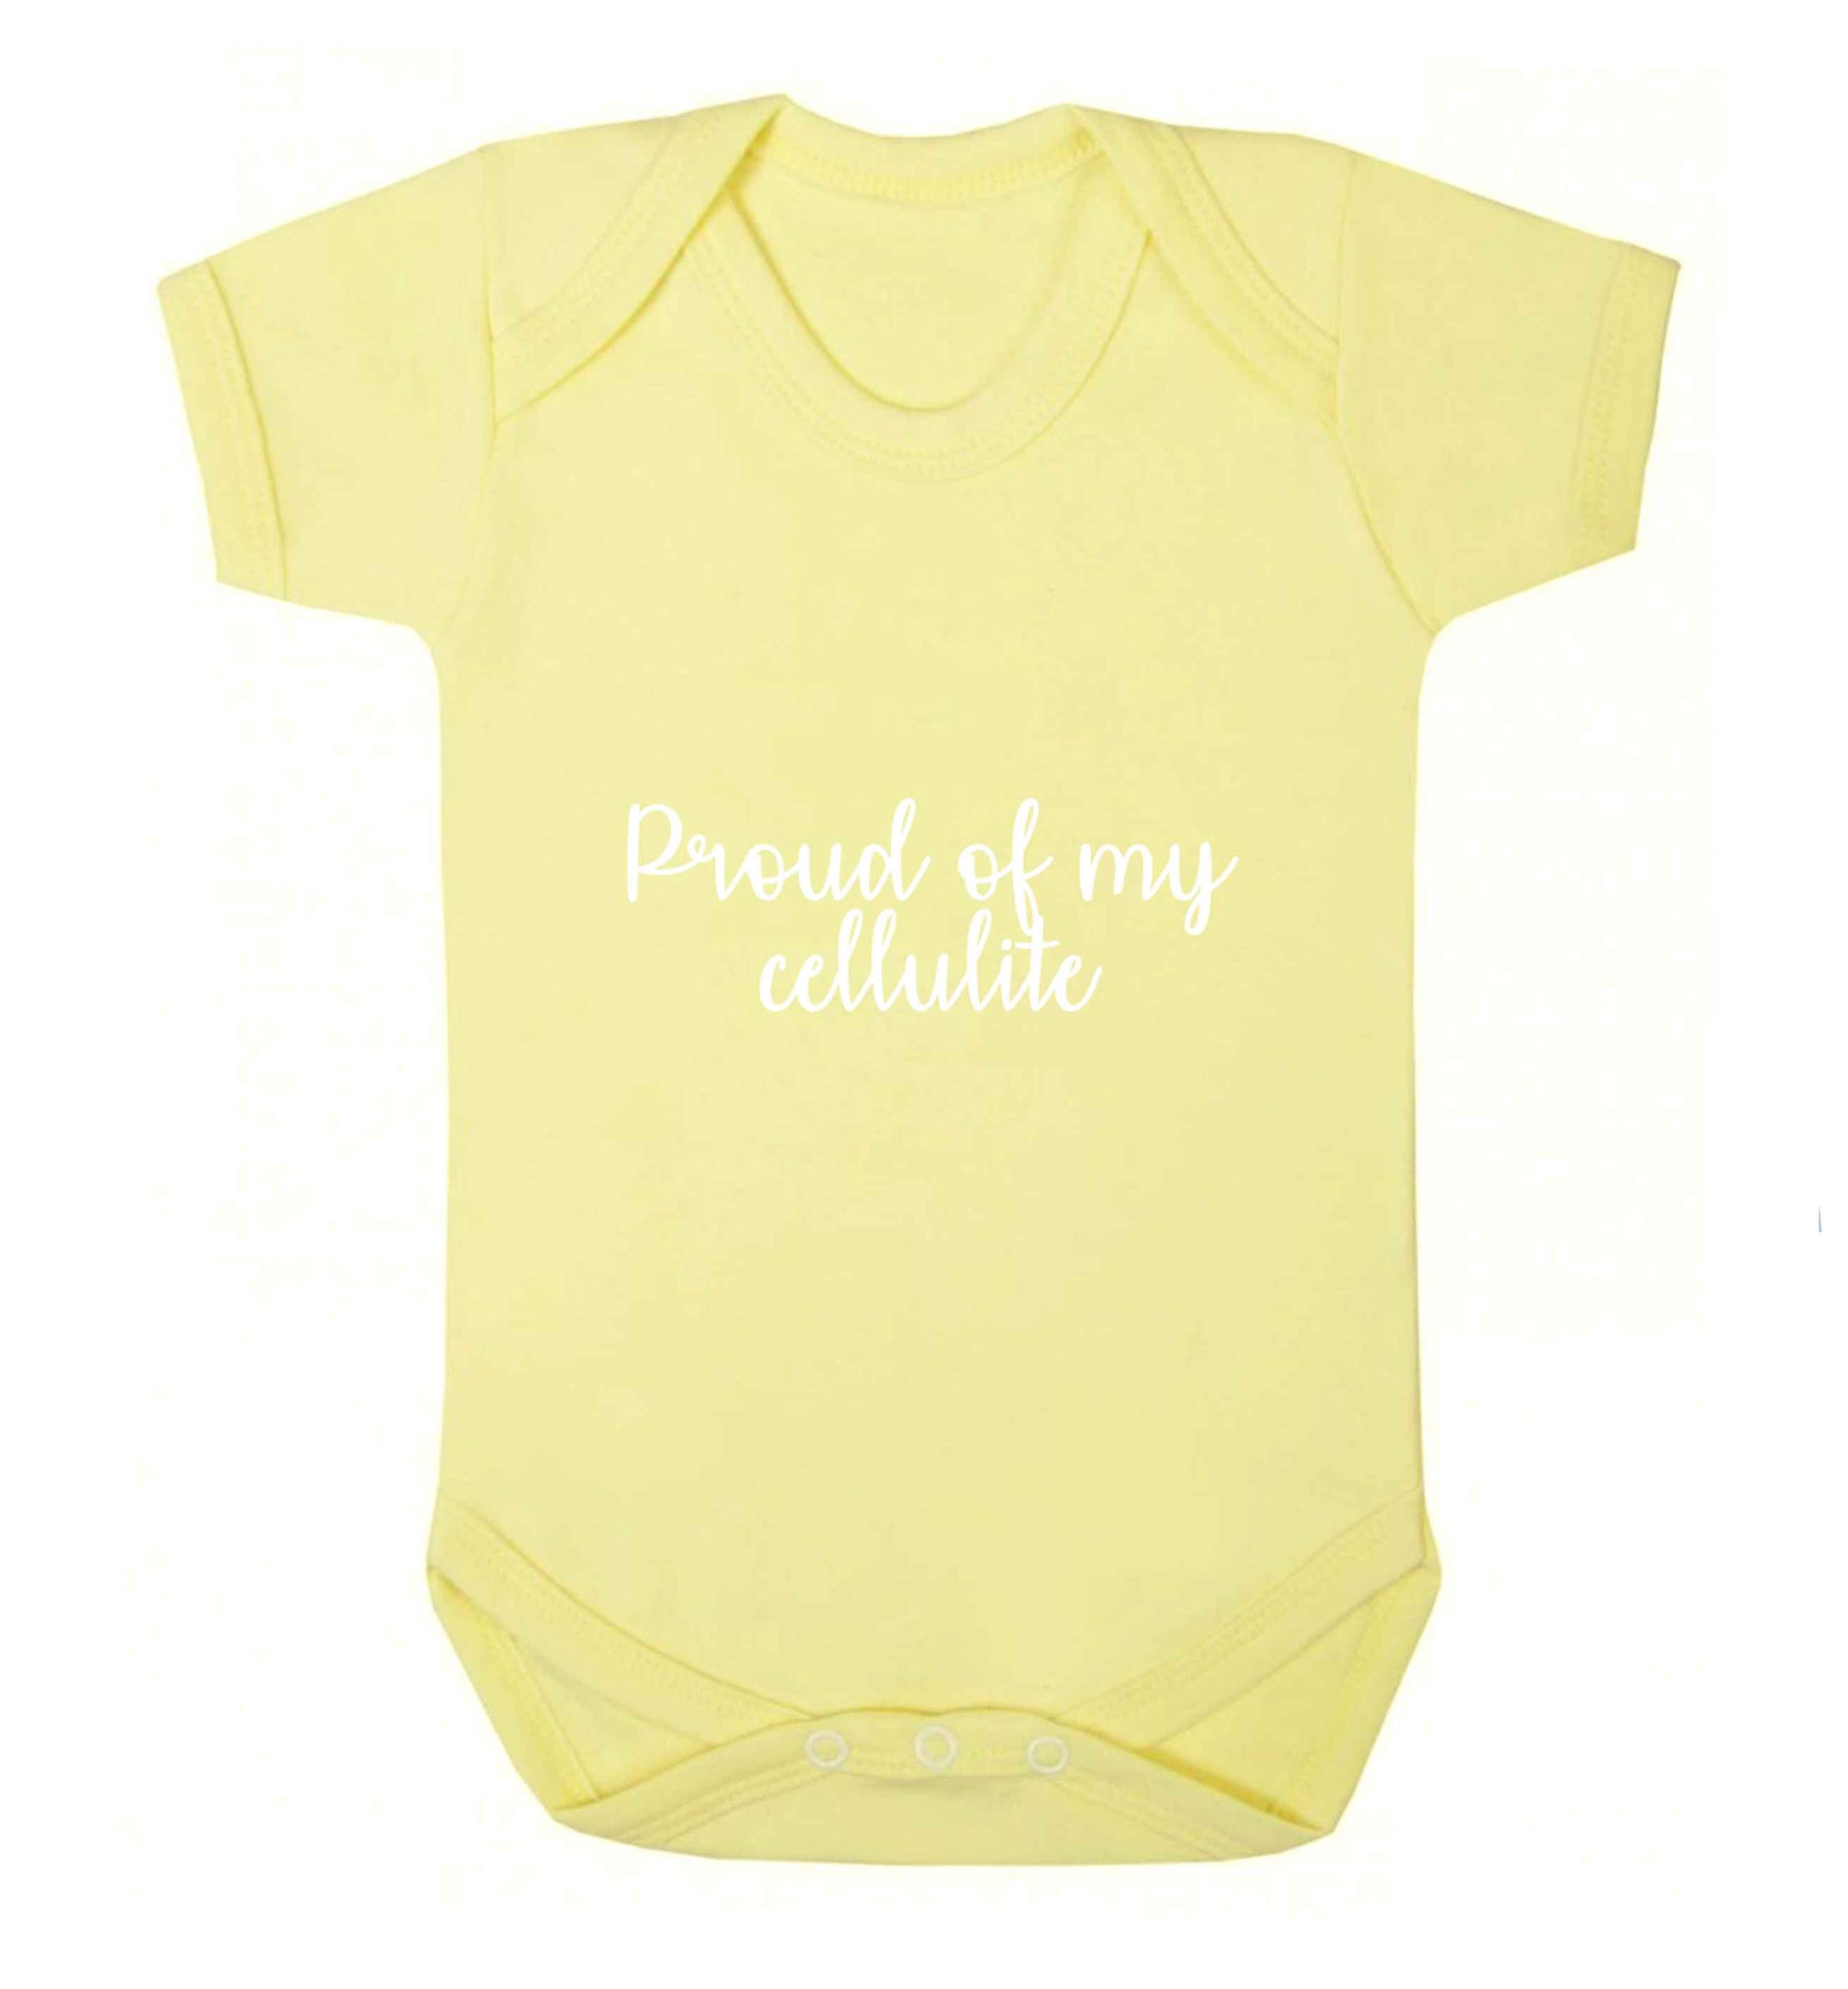 Proud of my cellulite baby vest pale yellow 18-24 months